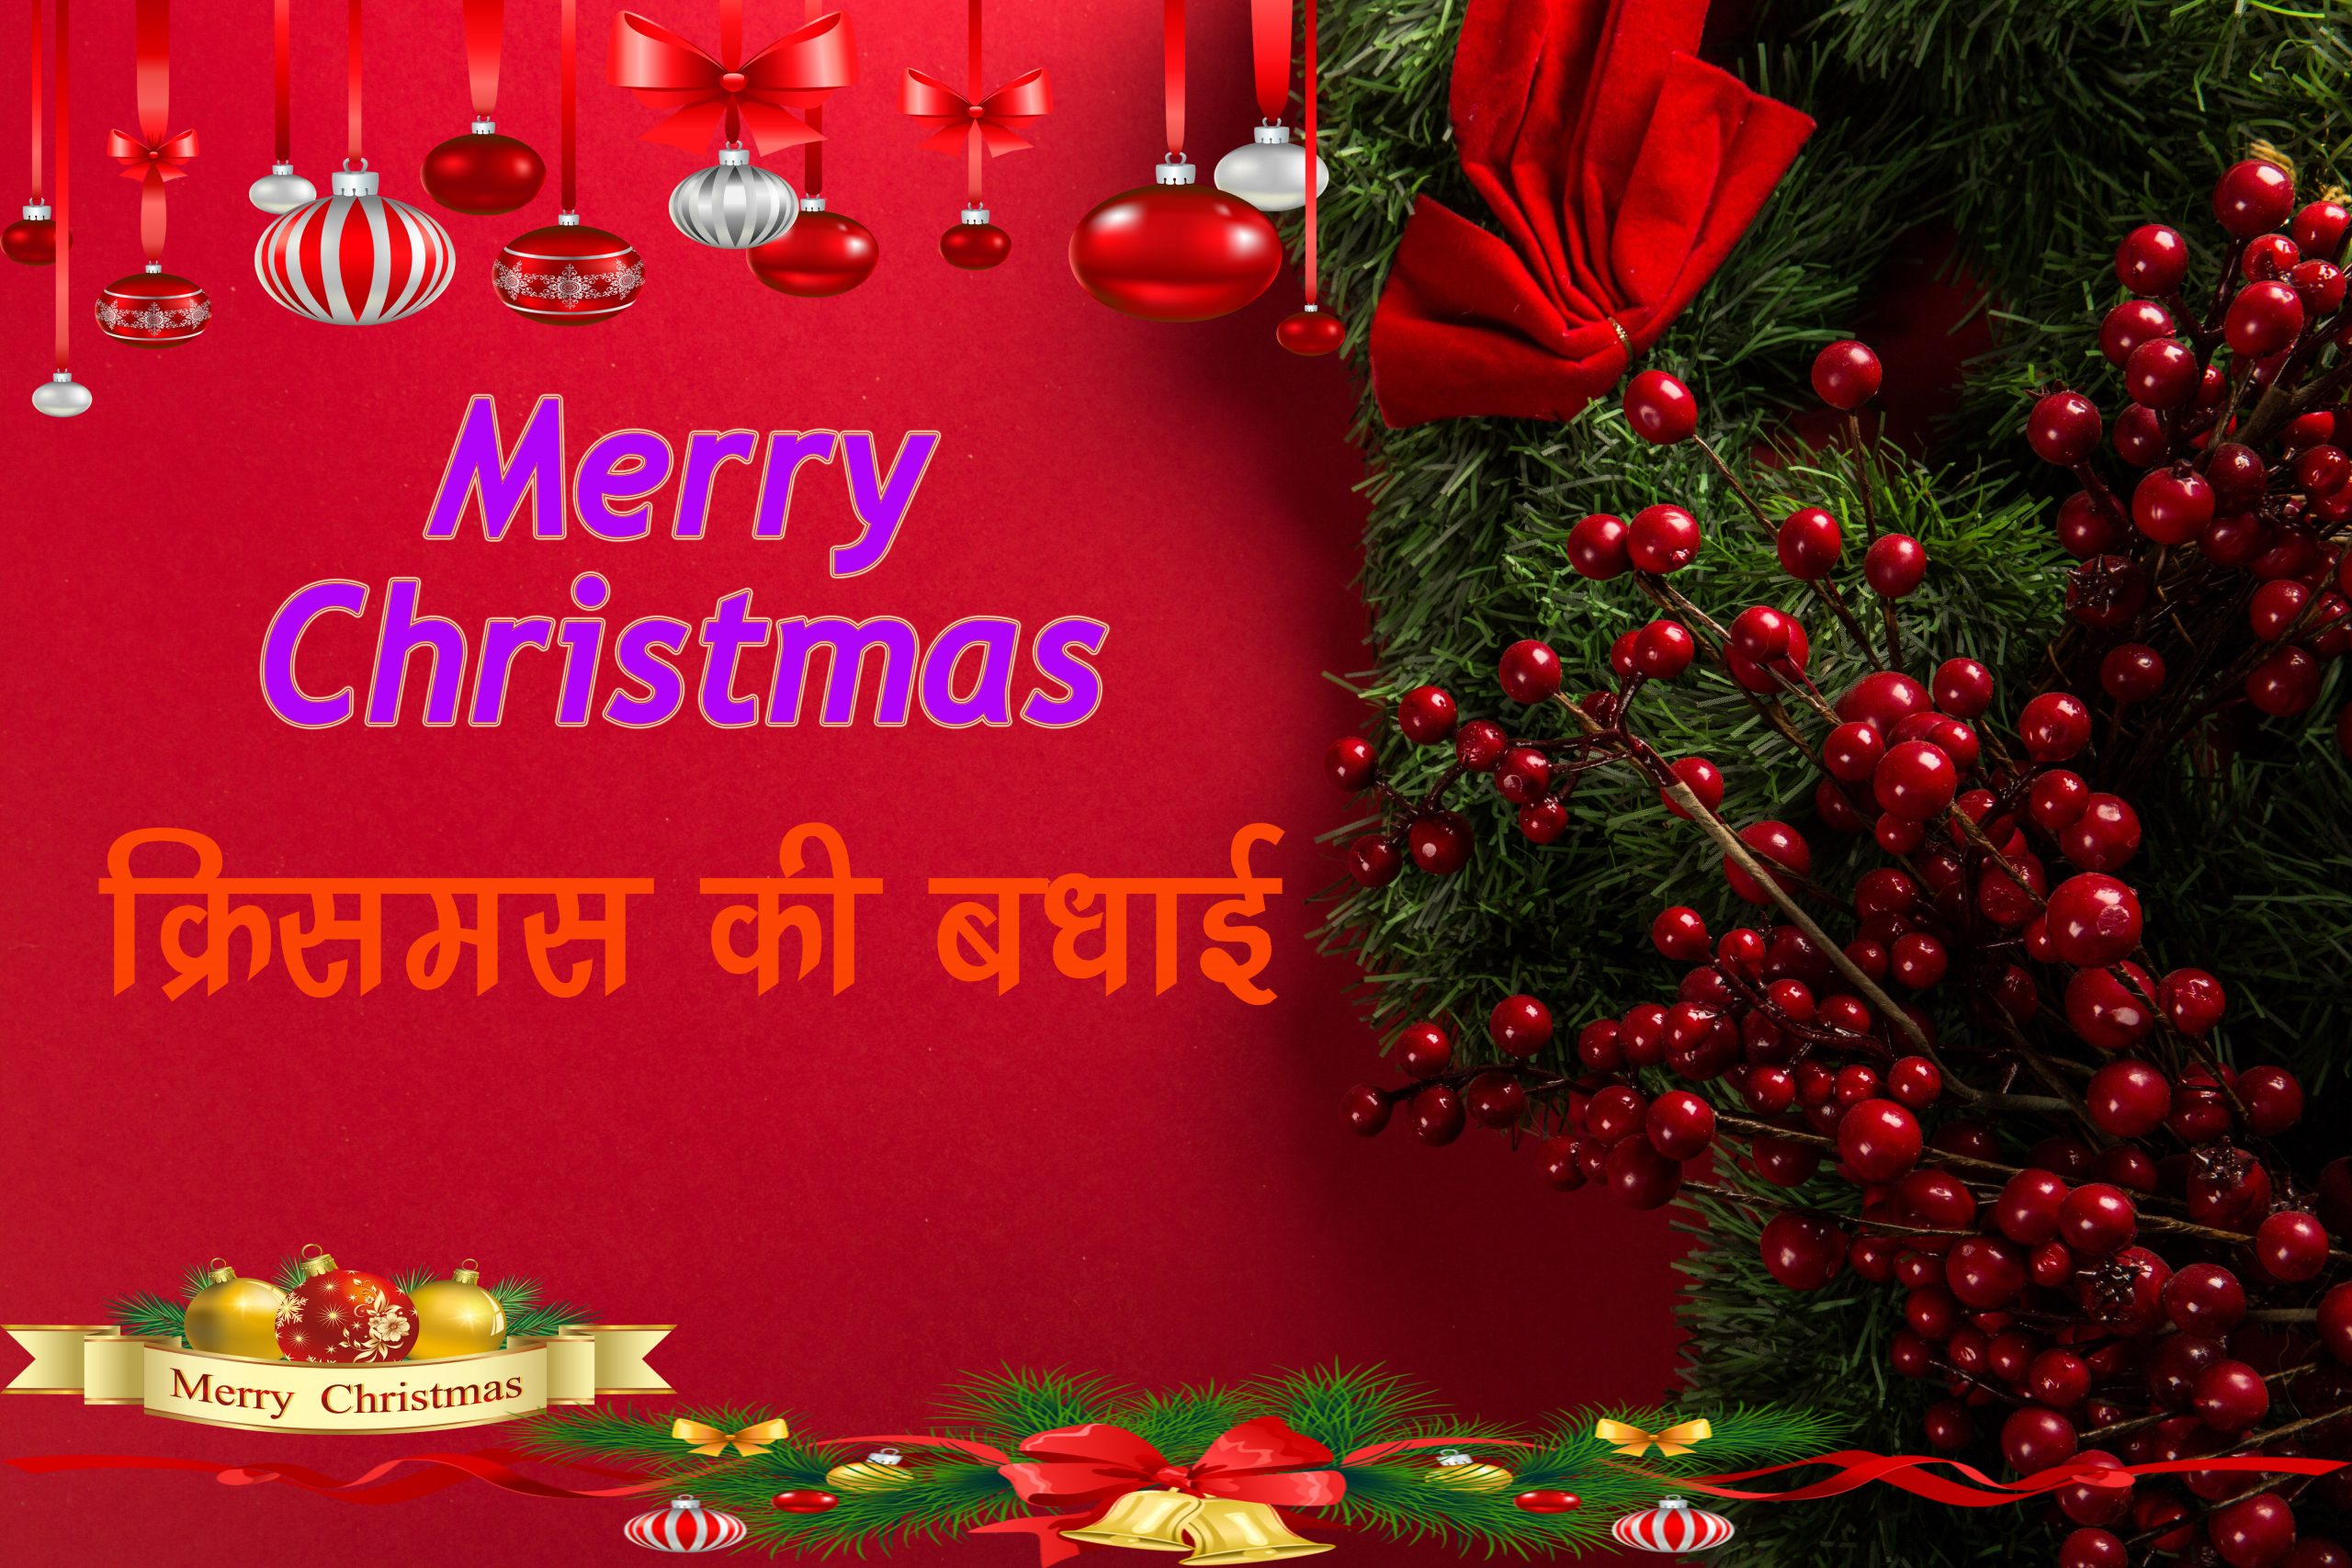 merry-christmas-wishes-messages